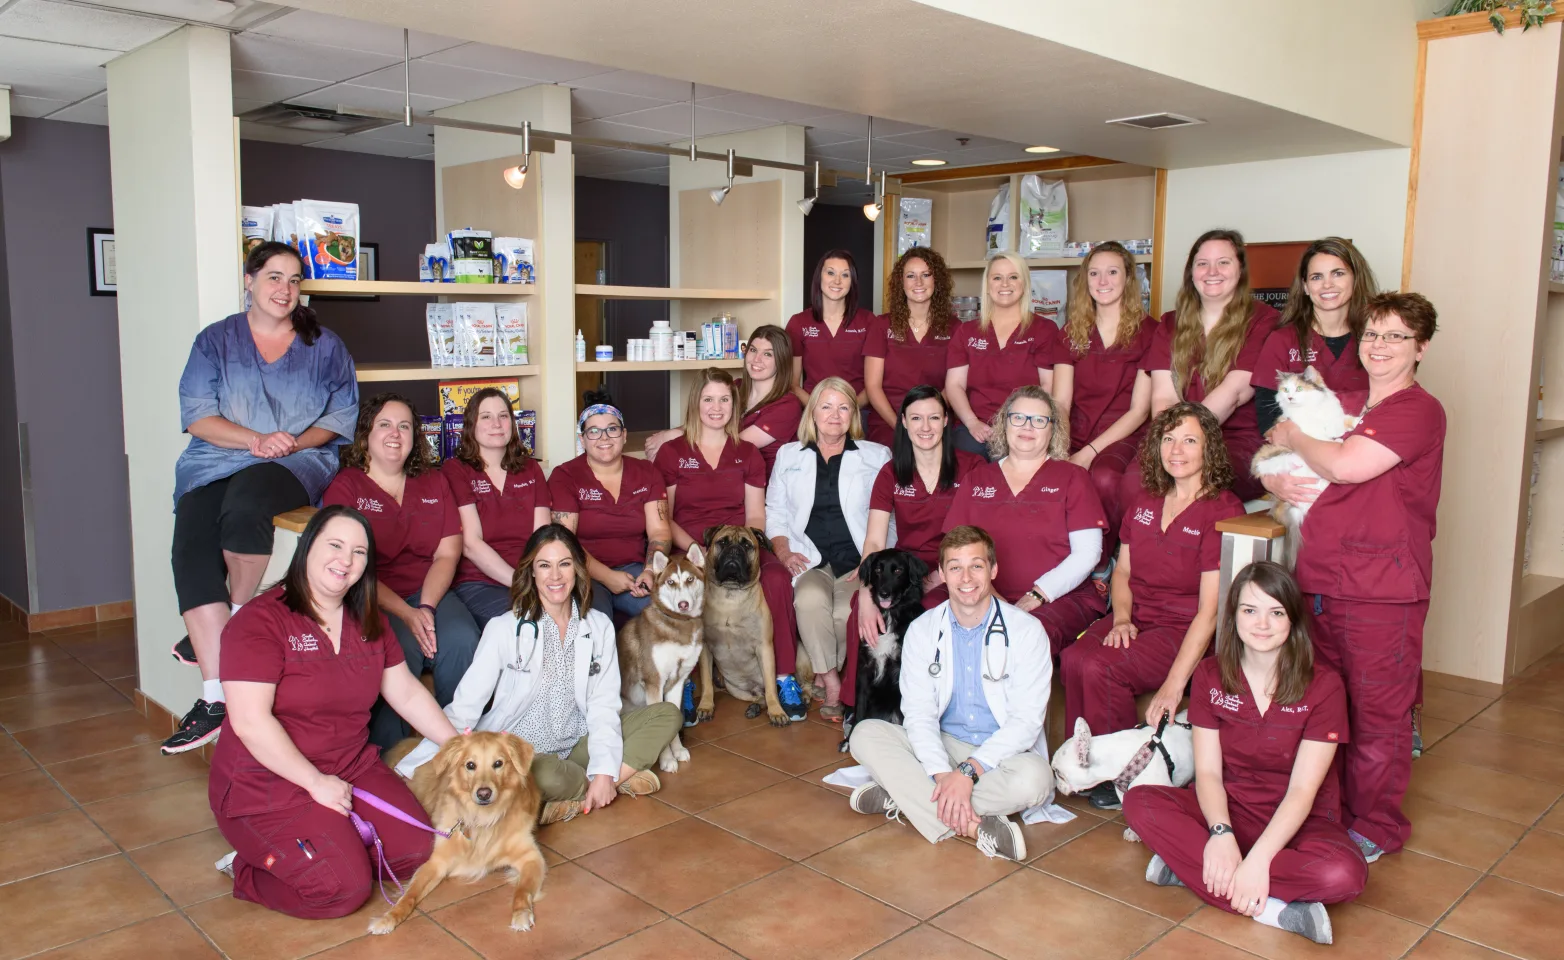 Group Photo of veterinary staff in burgundy scrubs at South Suburban Animal Hospital